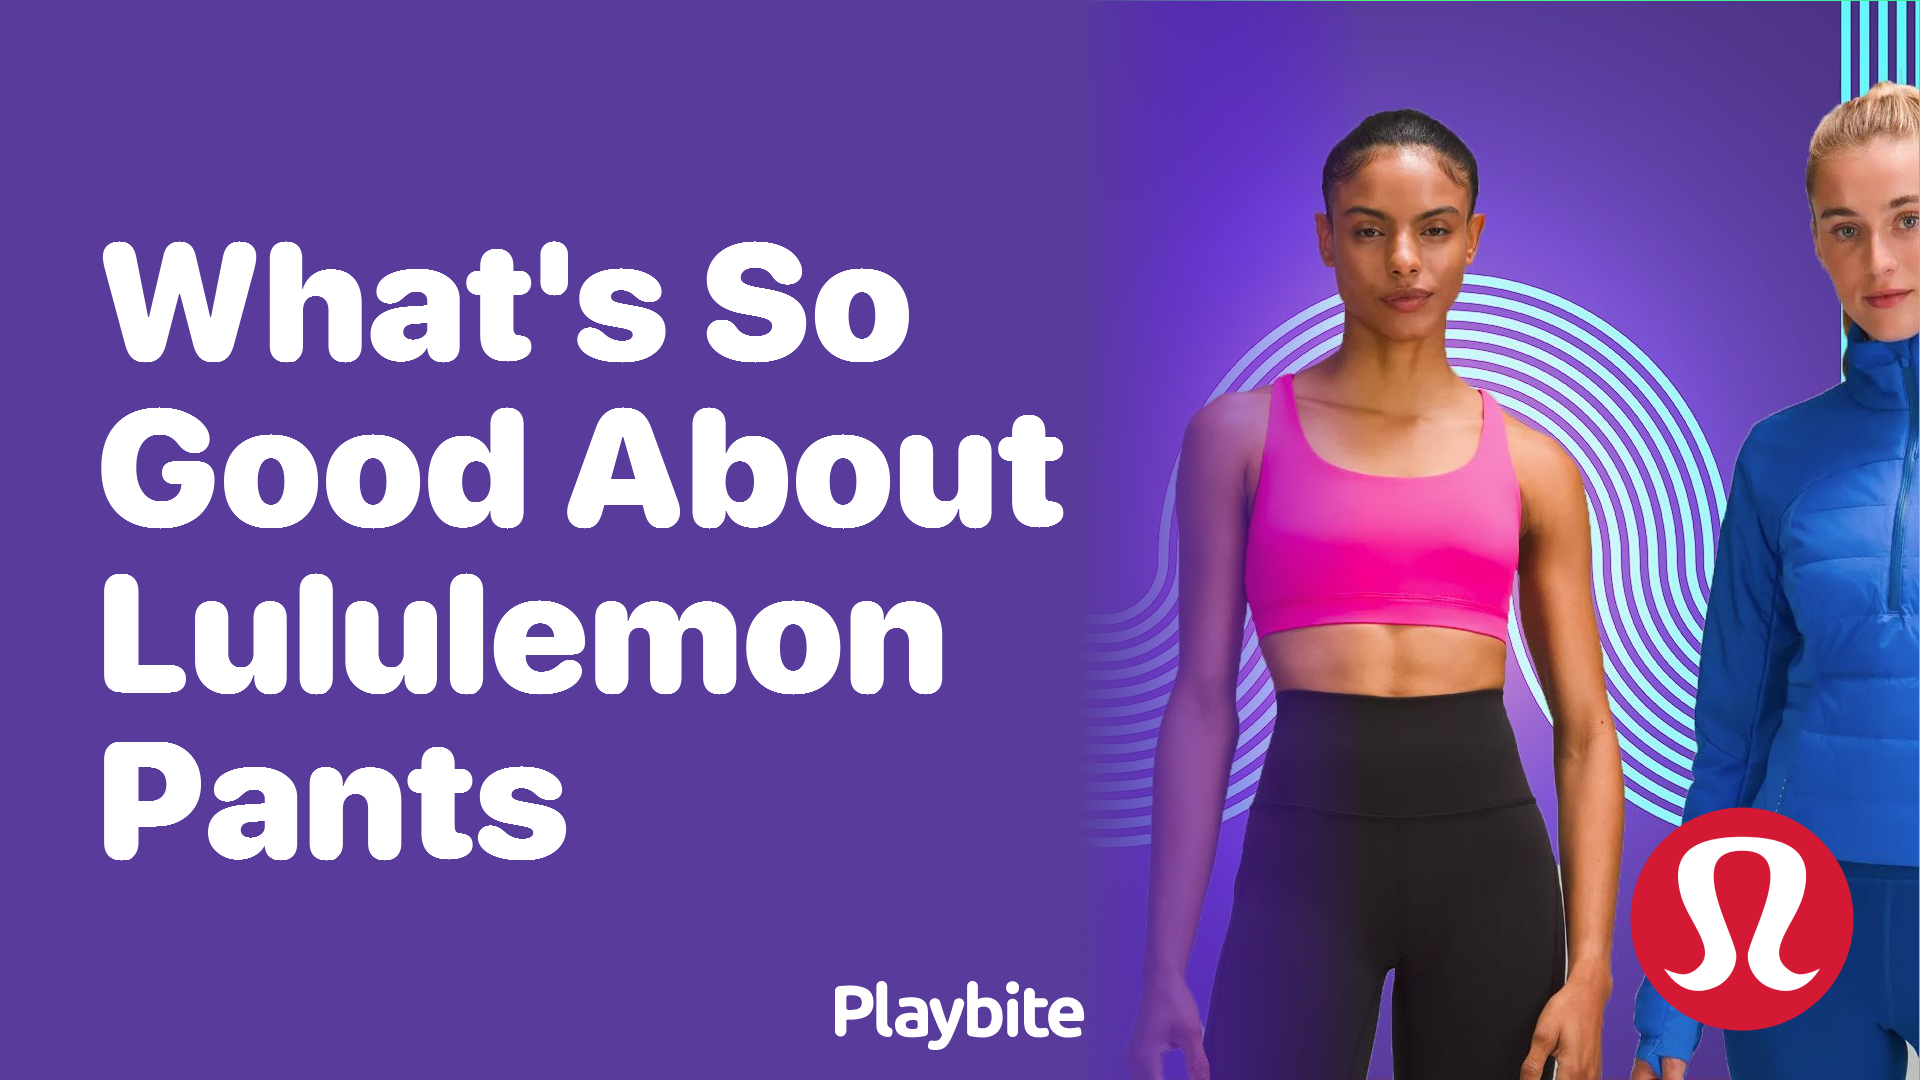 What's So Good About Lululemon Pants? - Playbite